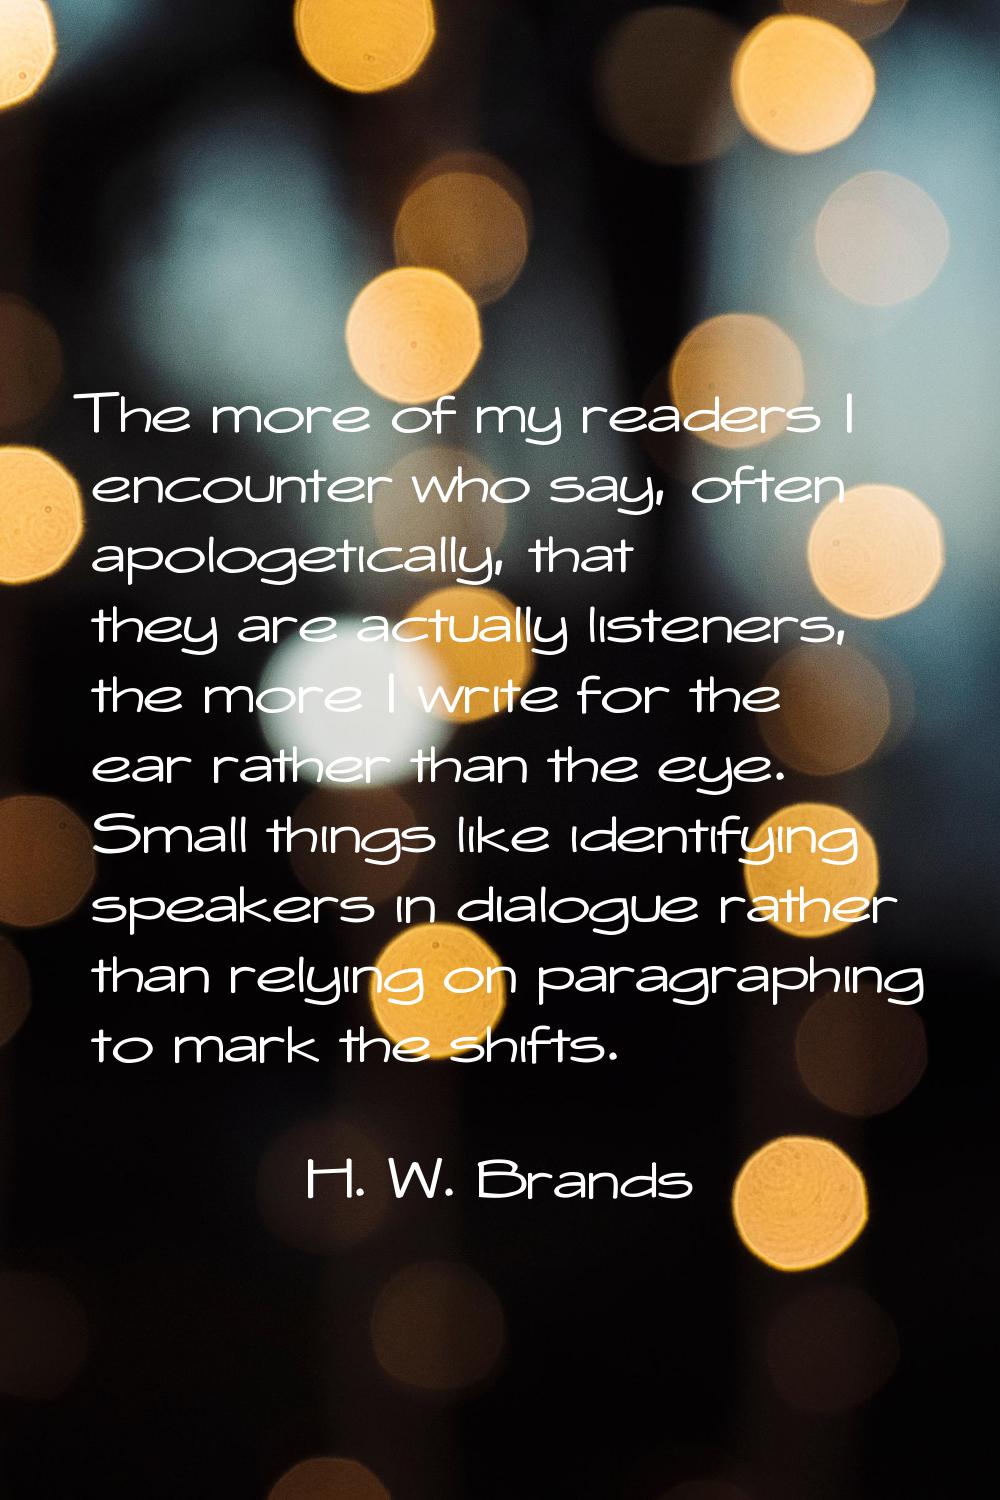 The more of my readers I encounter who say, often apologetically, that they are actually listeners,